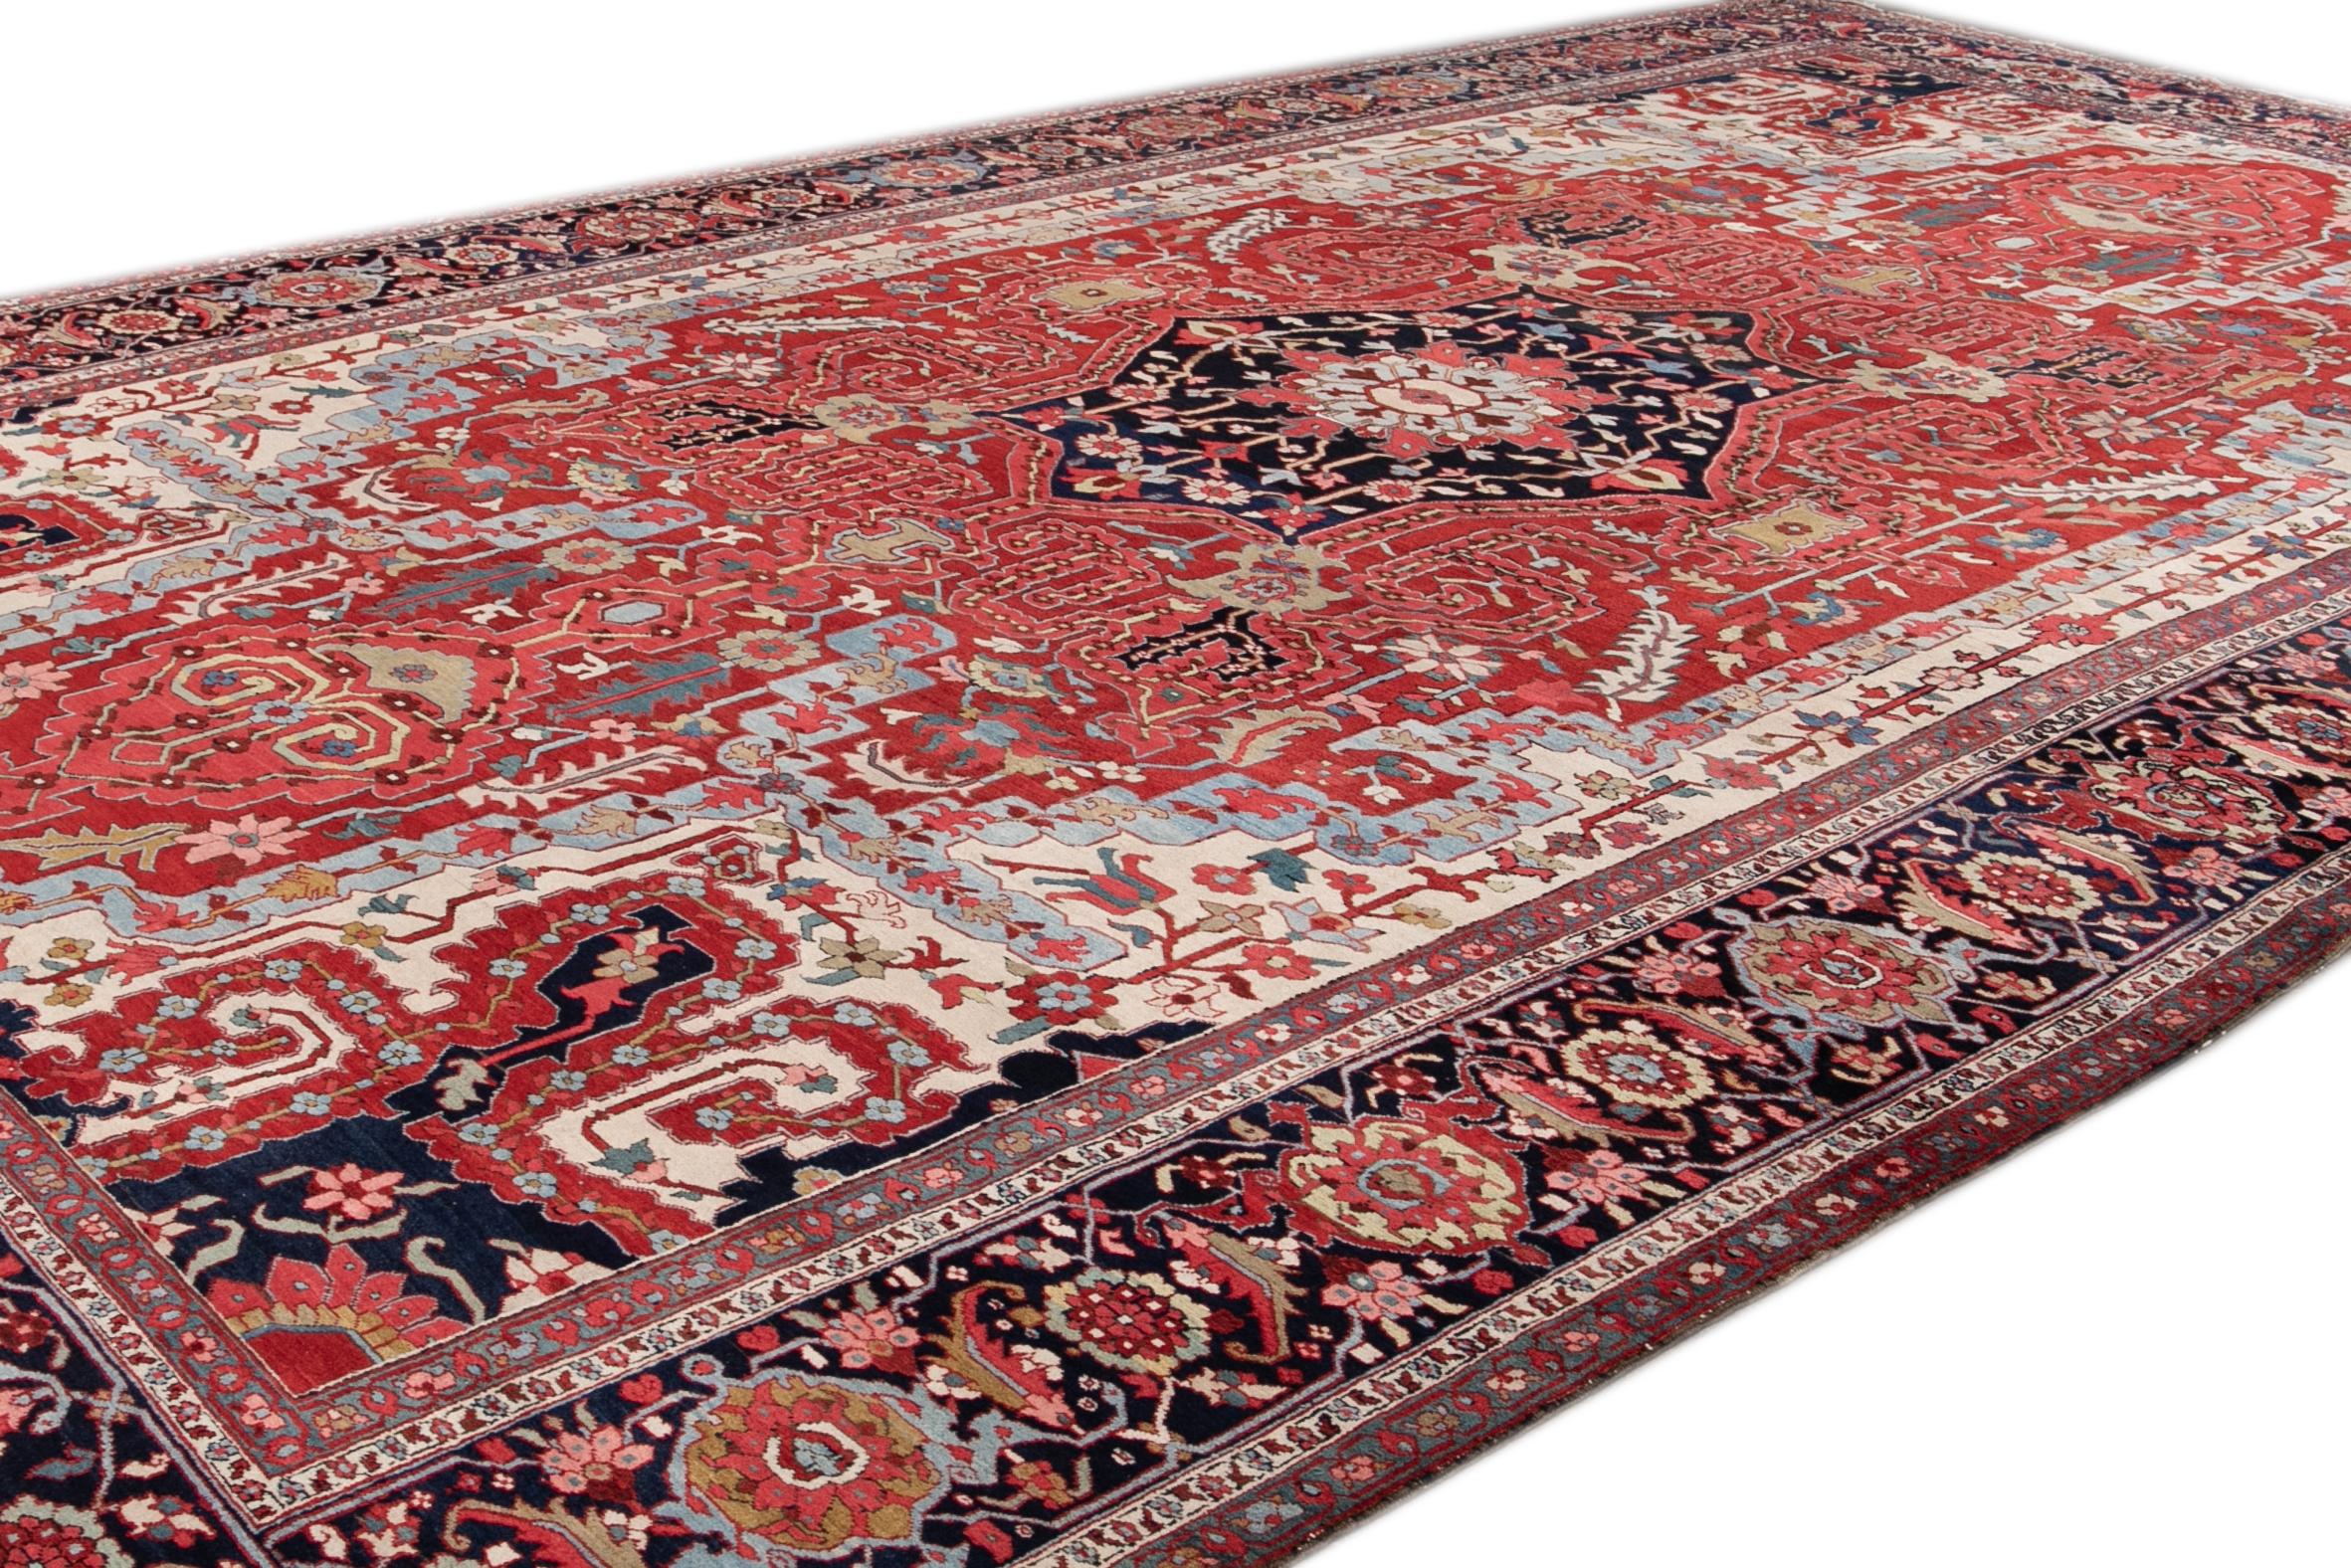 Red 19th Century Antique Serapi Handmade Wool Rug In Excellent Condition For Sale In Norwalk, CT